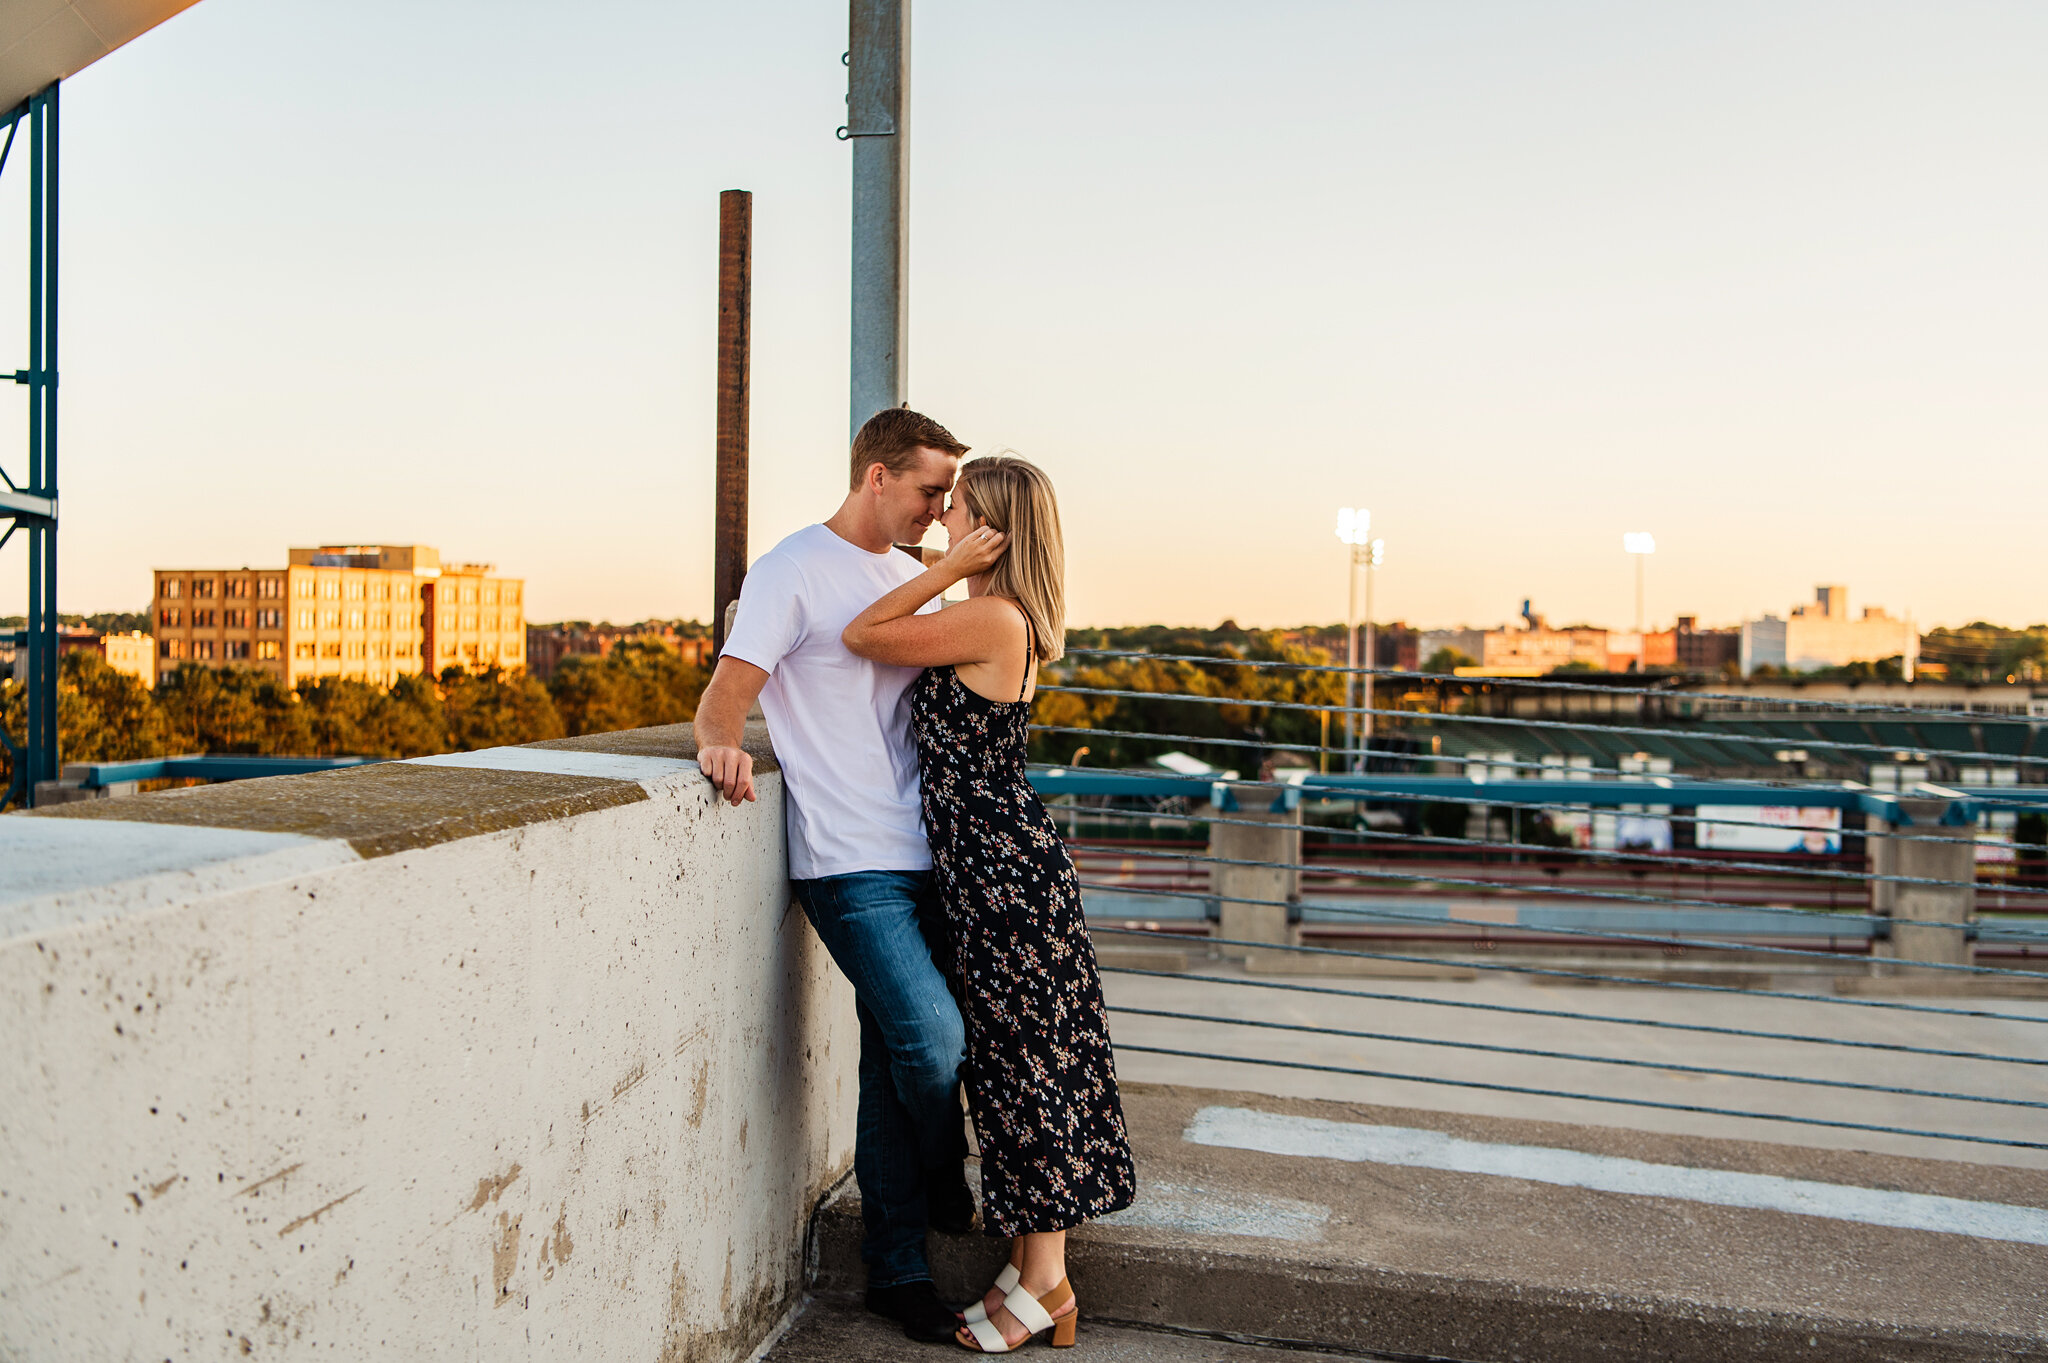 Genesee_Brew_House_High_Falls_Rochester_Engagement_Session_JILL_STUDIO_Rochester_NY_Photographer_5821.jpg